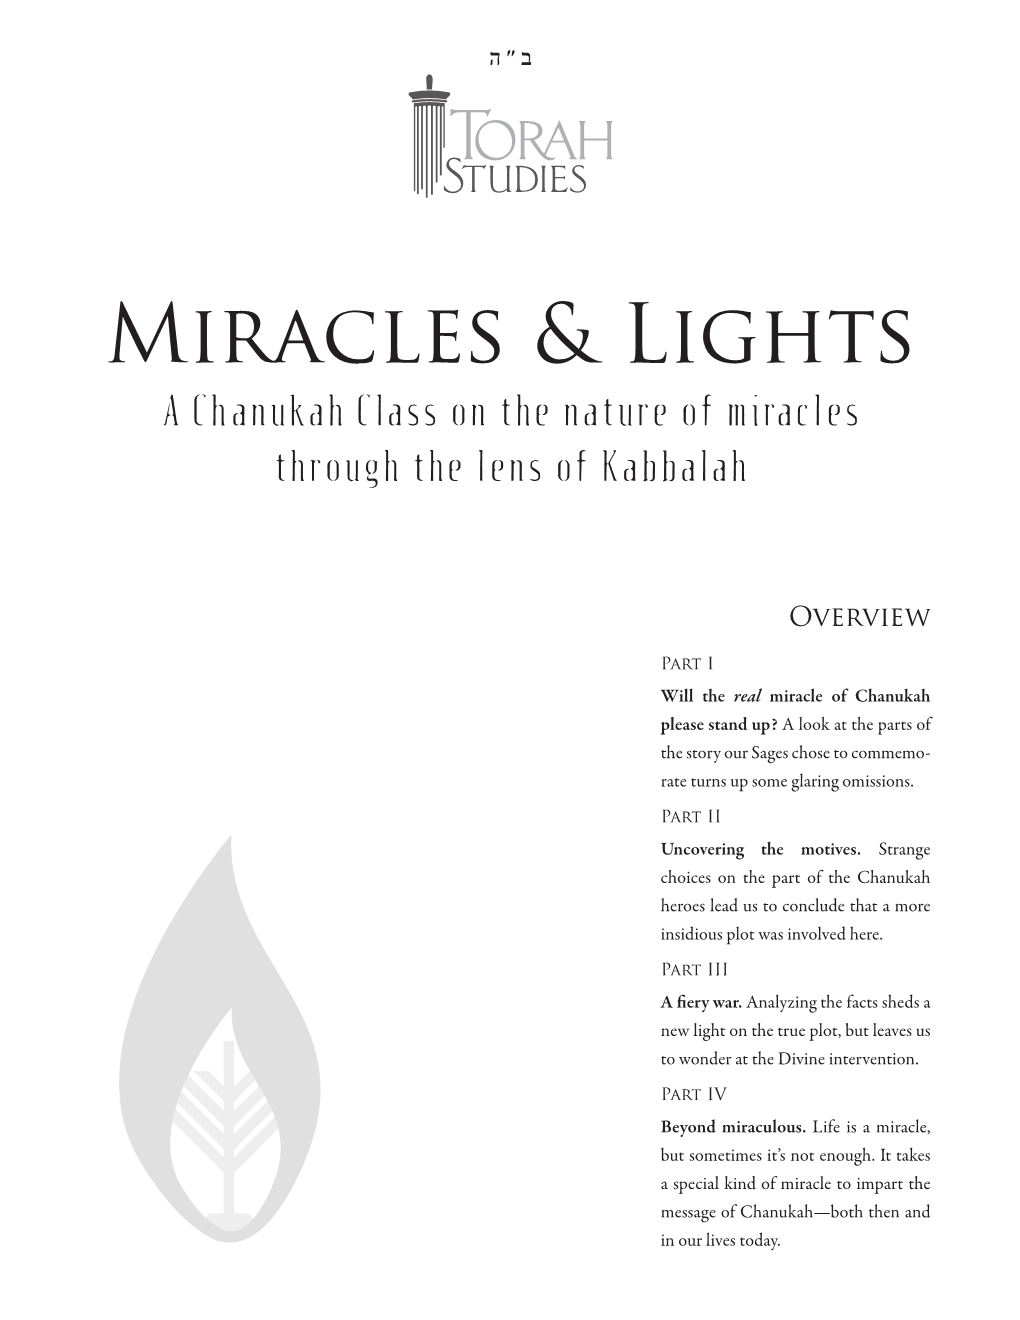 Miracles & Lights